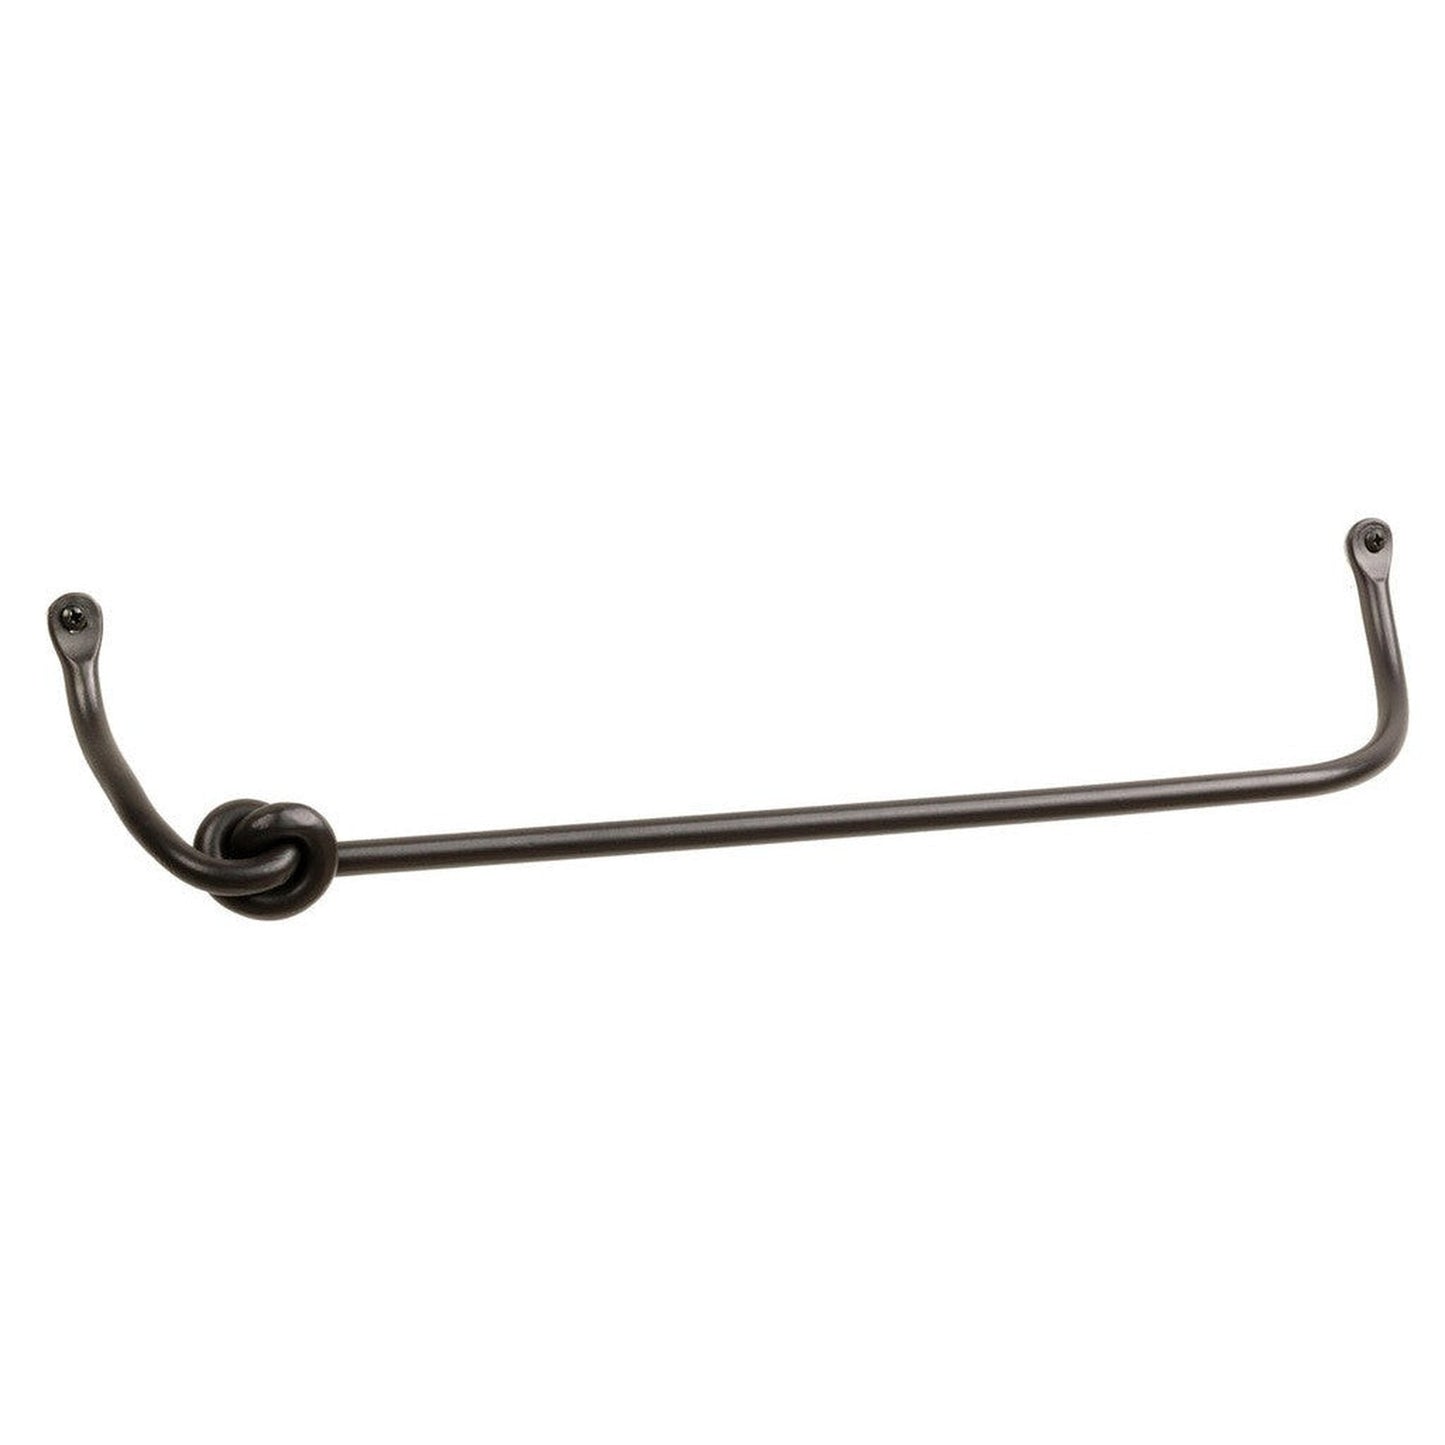 Stone County Ironworks Knot 32" Hand Rubbed Brass Iron Towel Bar With Pewter Iron Accent